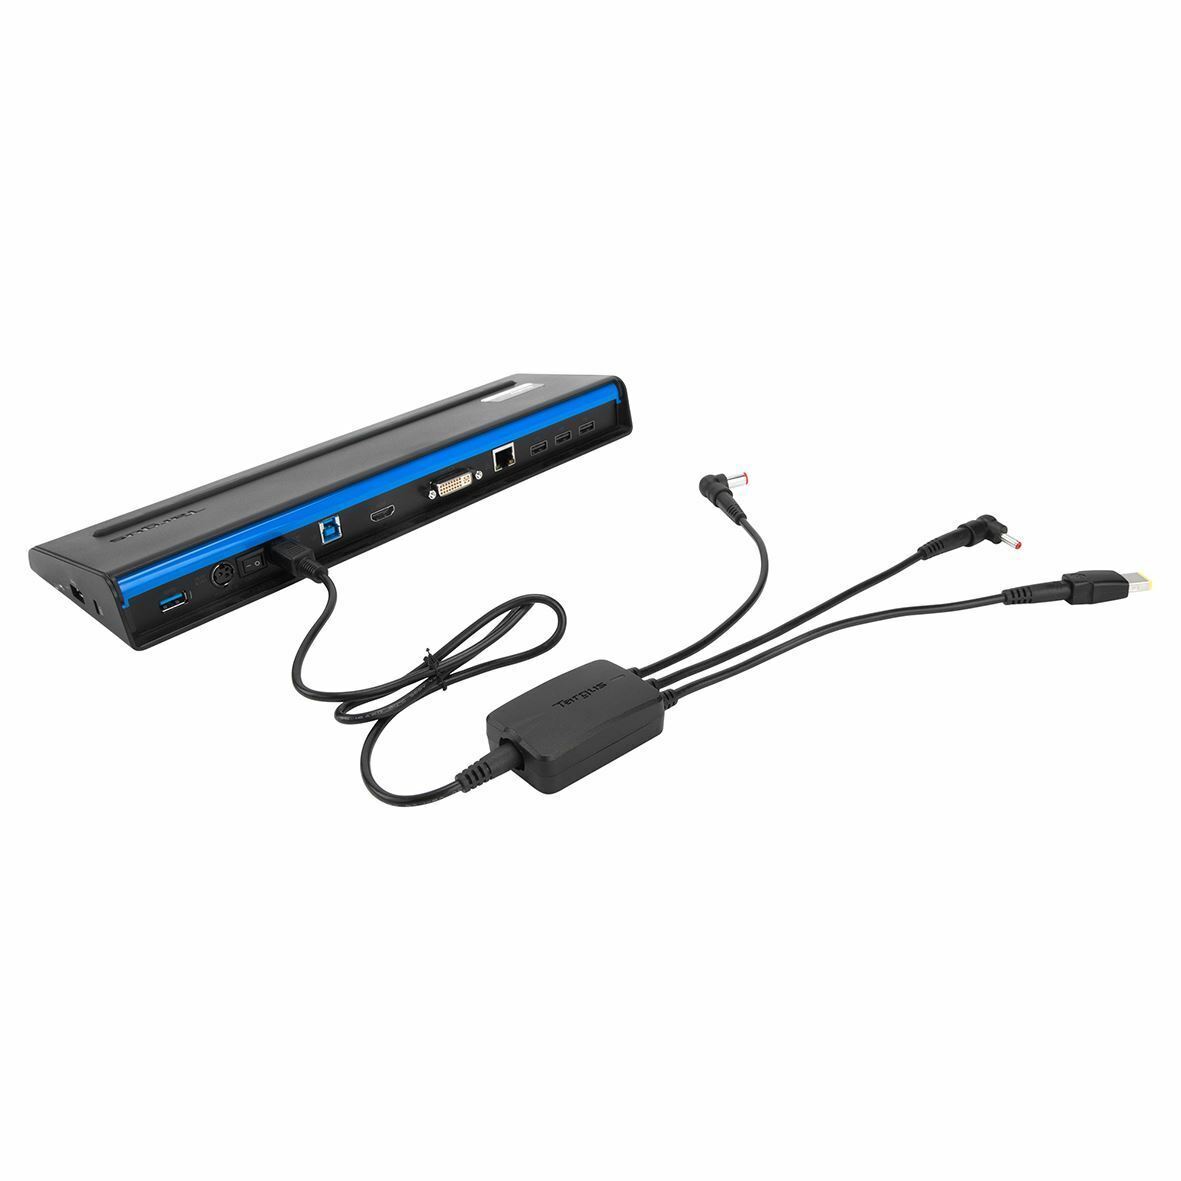 Targus ACP77 Universal USB 3.0 Docking Station with 3 Way DC Charger & USB cable